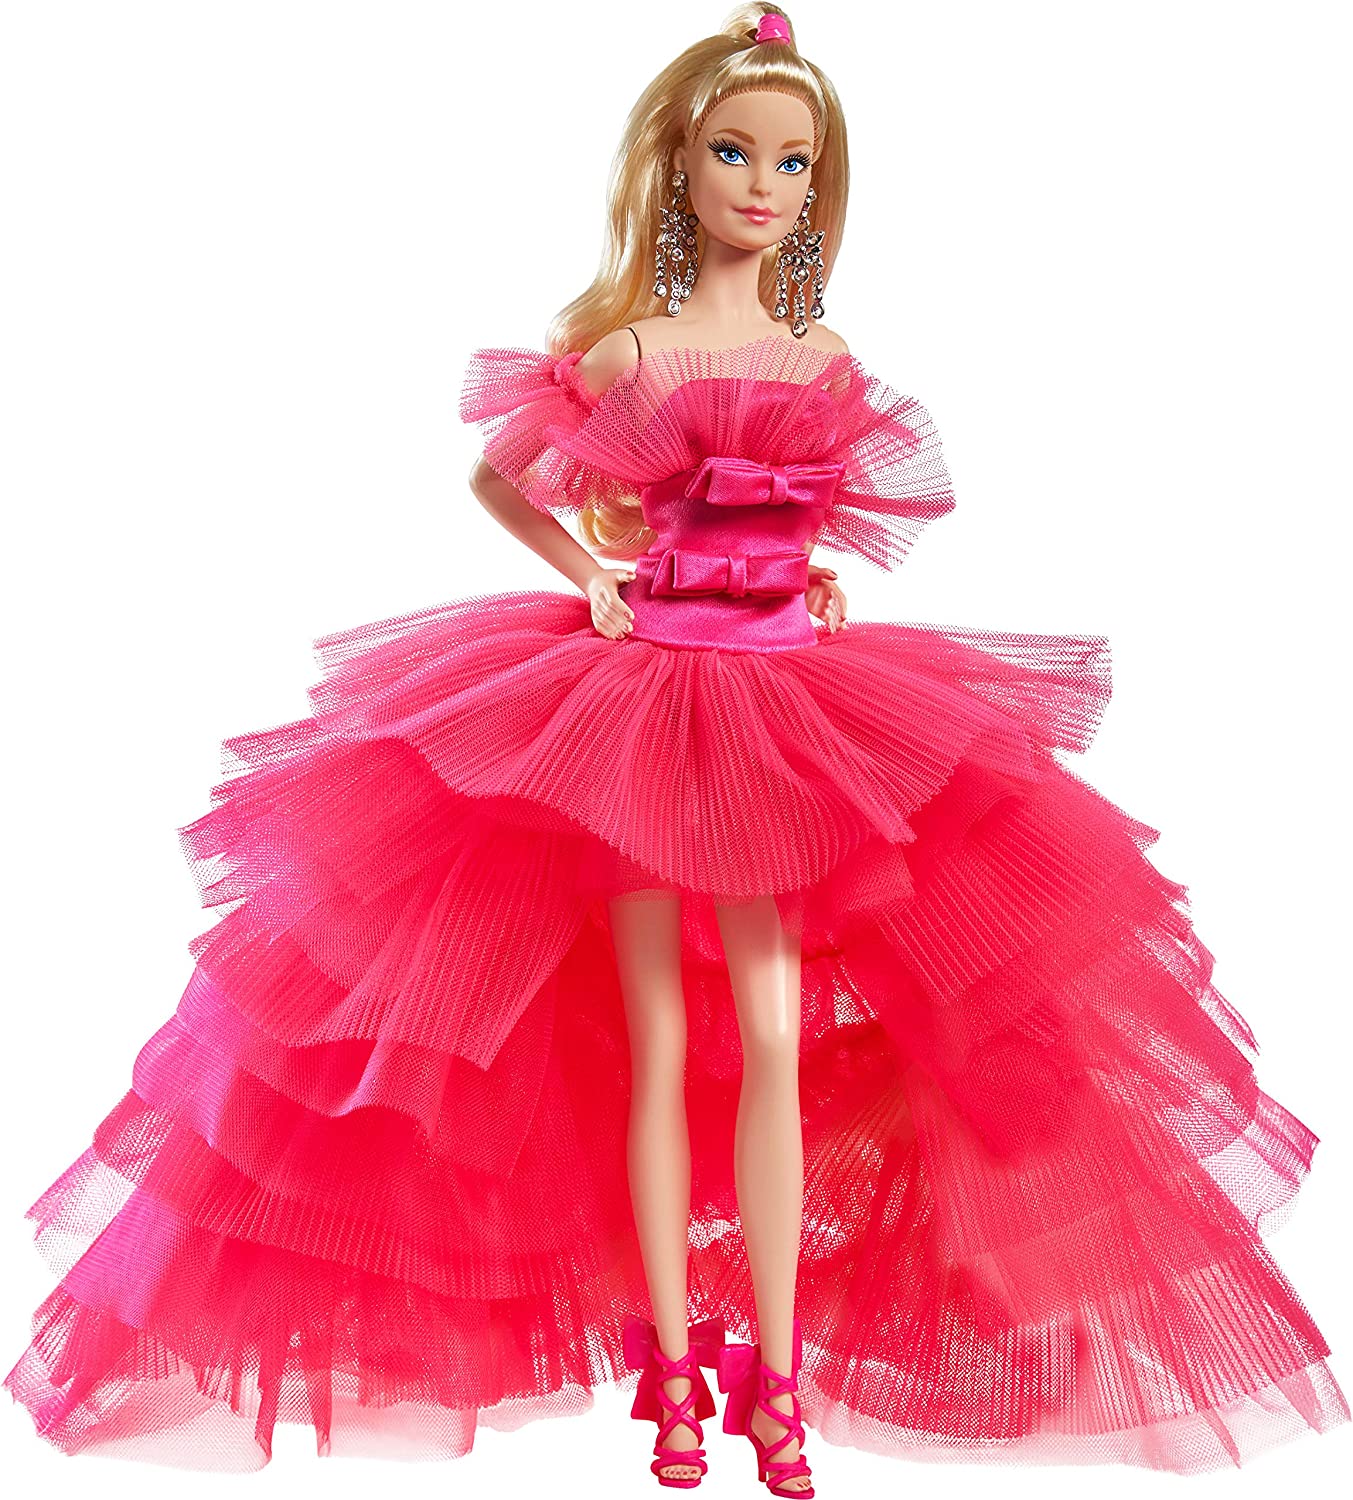 Barbie Signature Pink Collection Doll is released